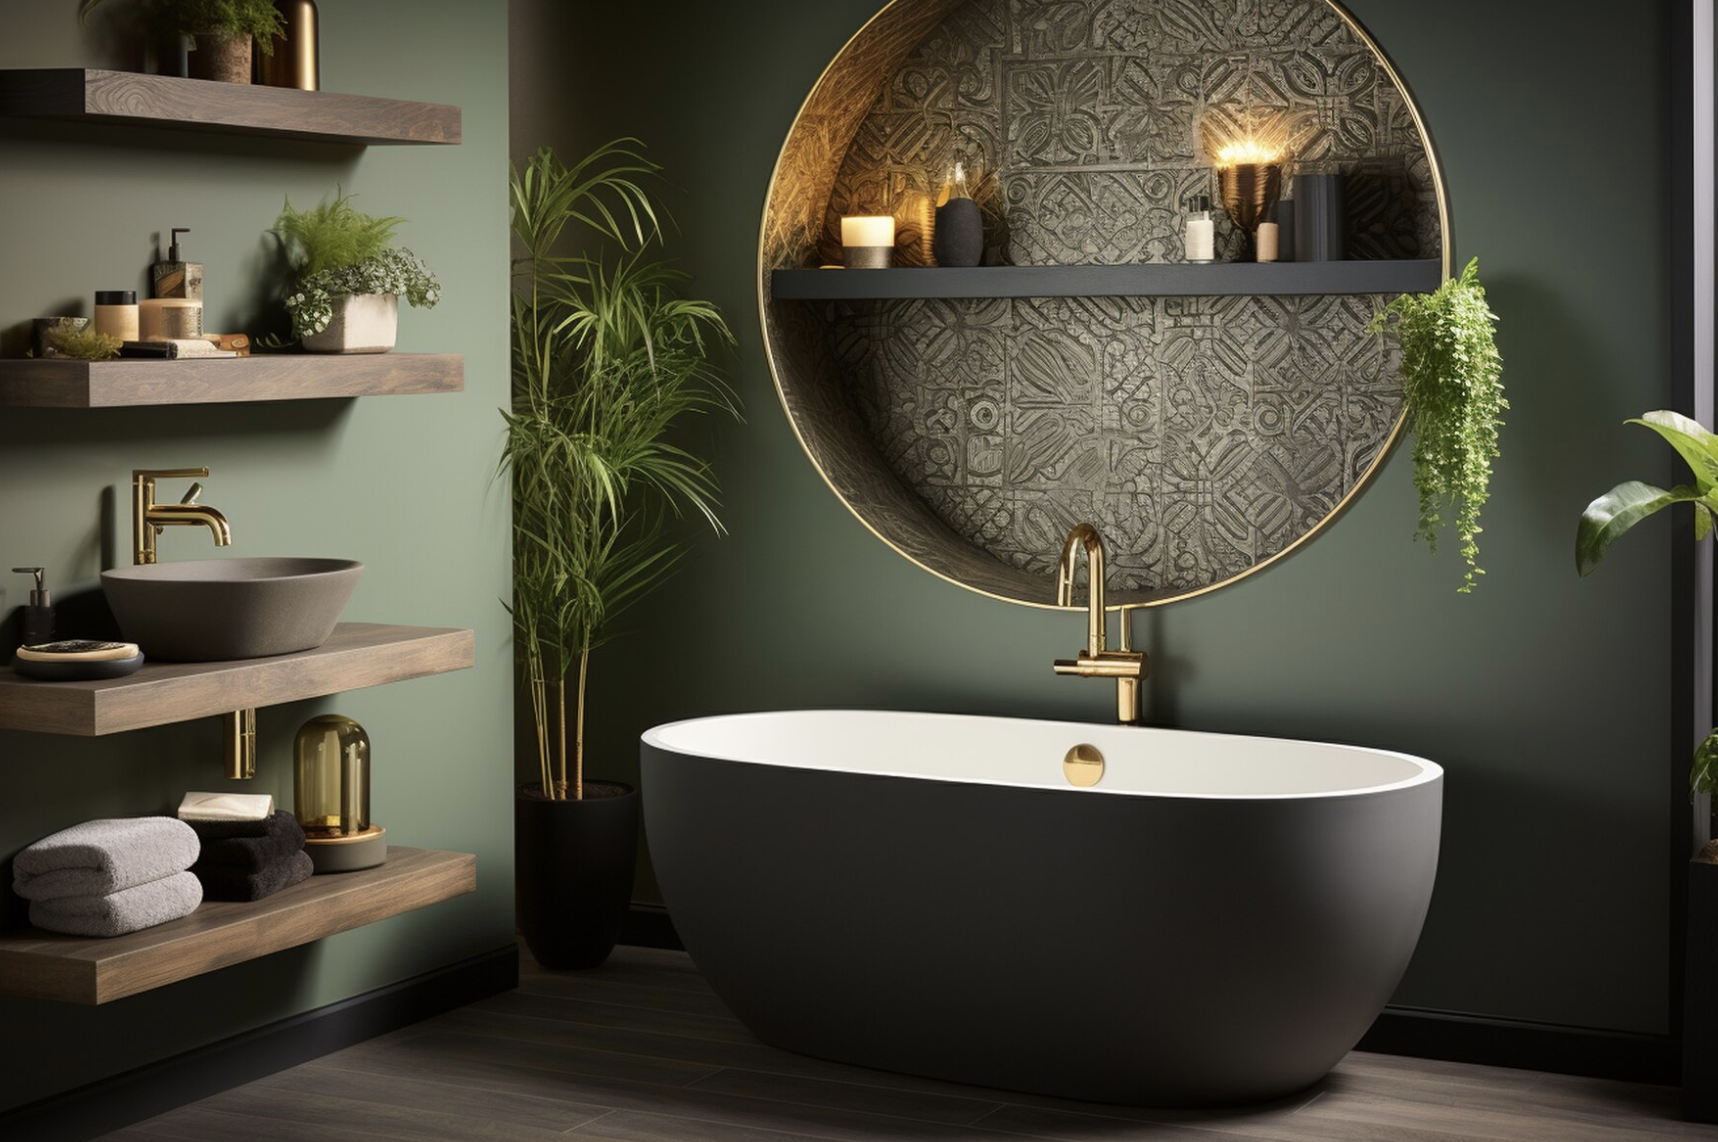 8 Beautiful Bathroom Trends That Will Make You Want to Remodel